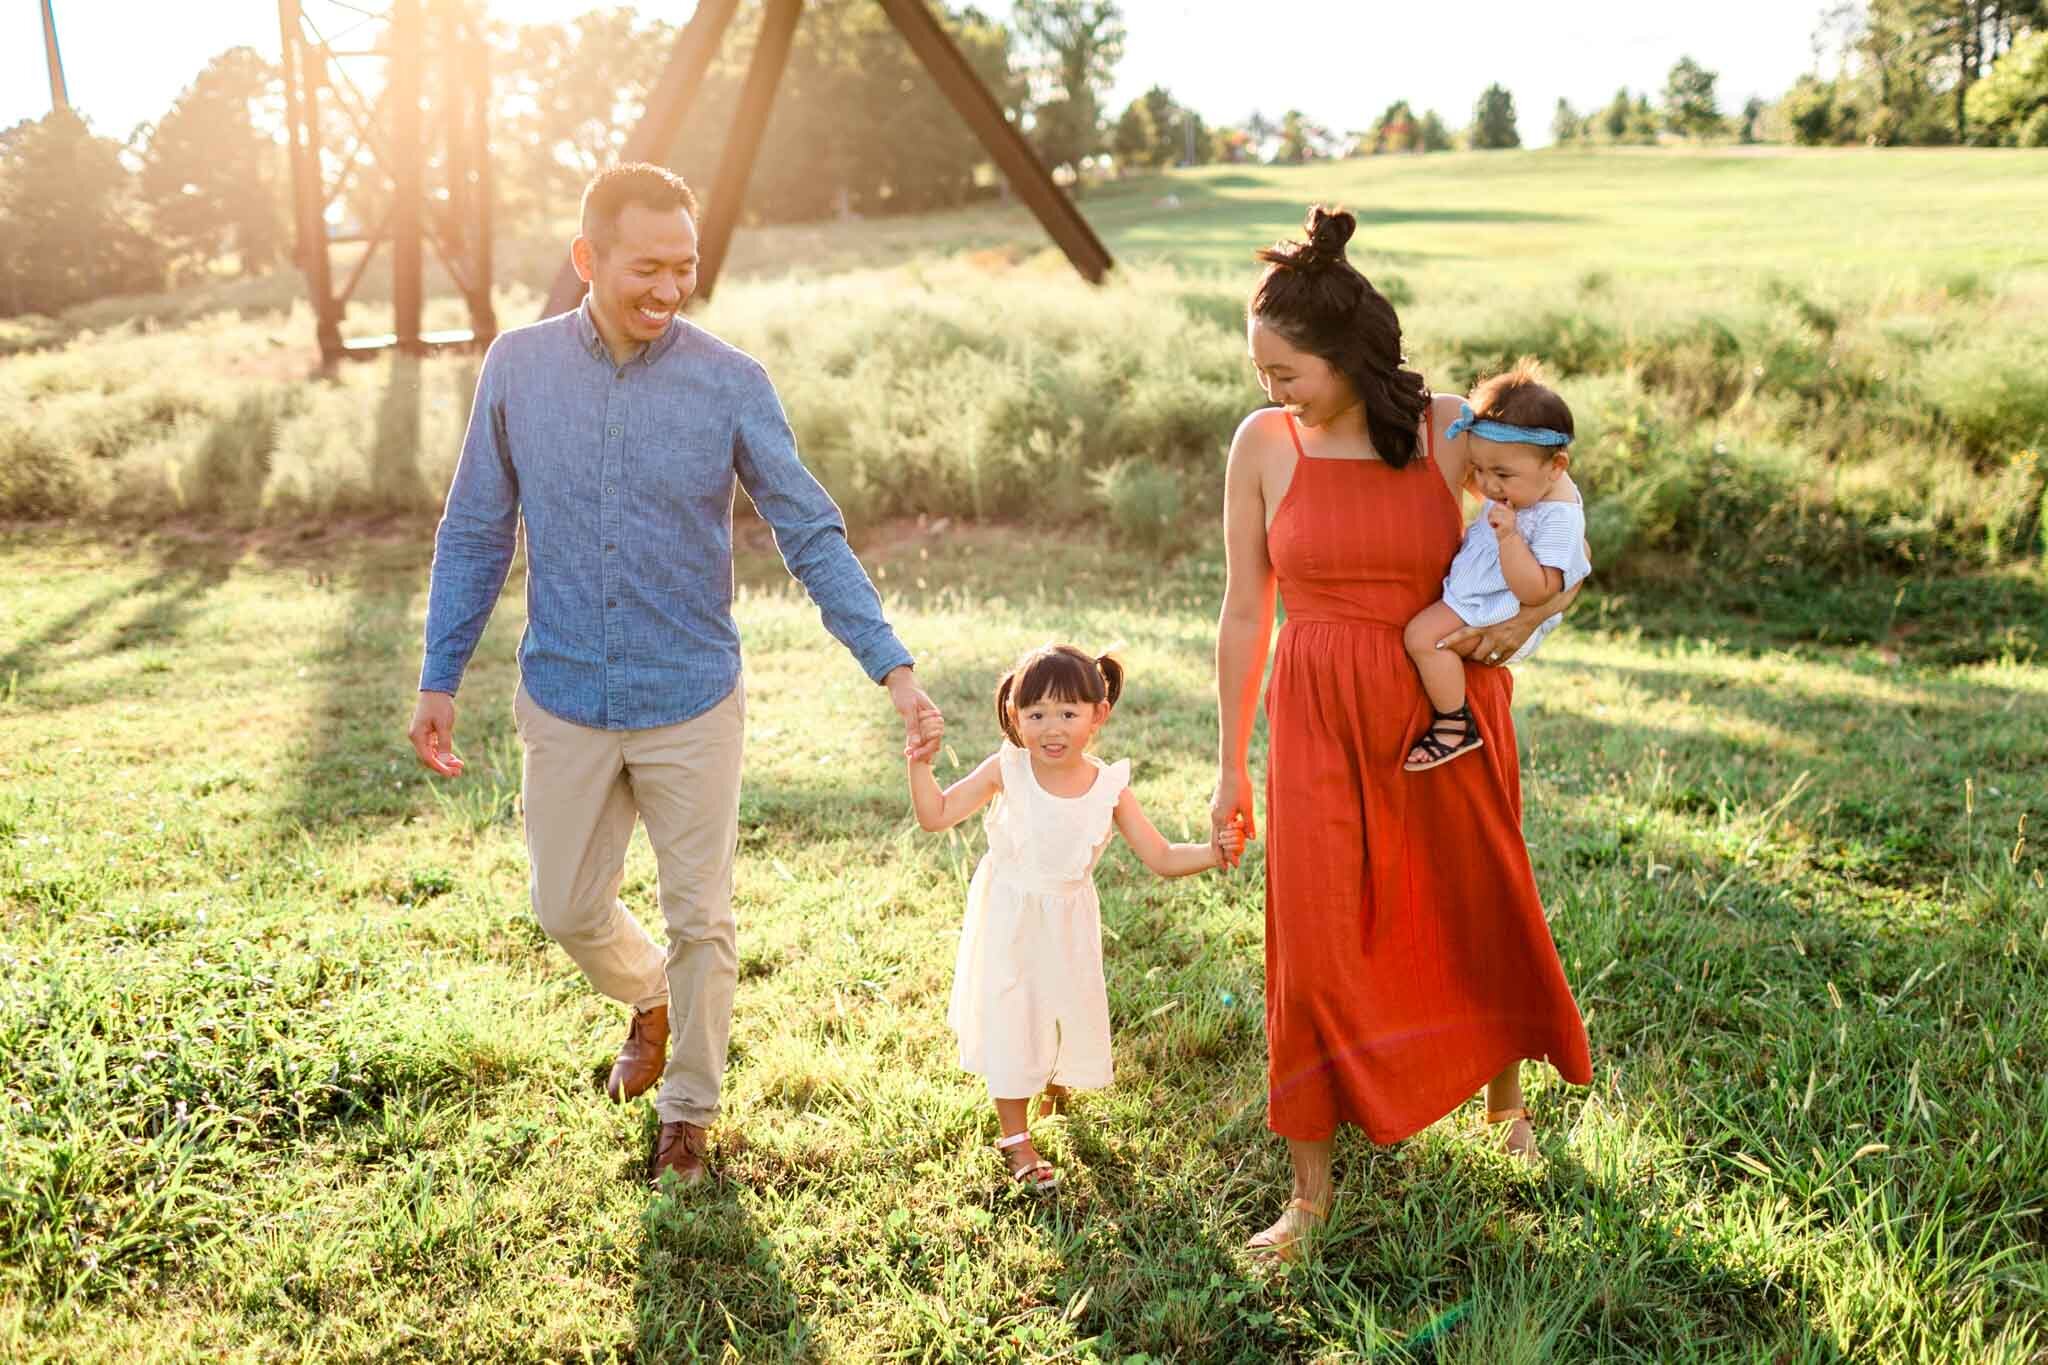 Raleigh Family Photographer | By G. Lin Photography | Candid open field photo of family walking together and holding hands